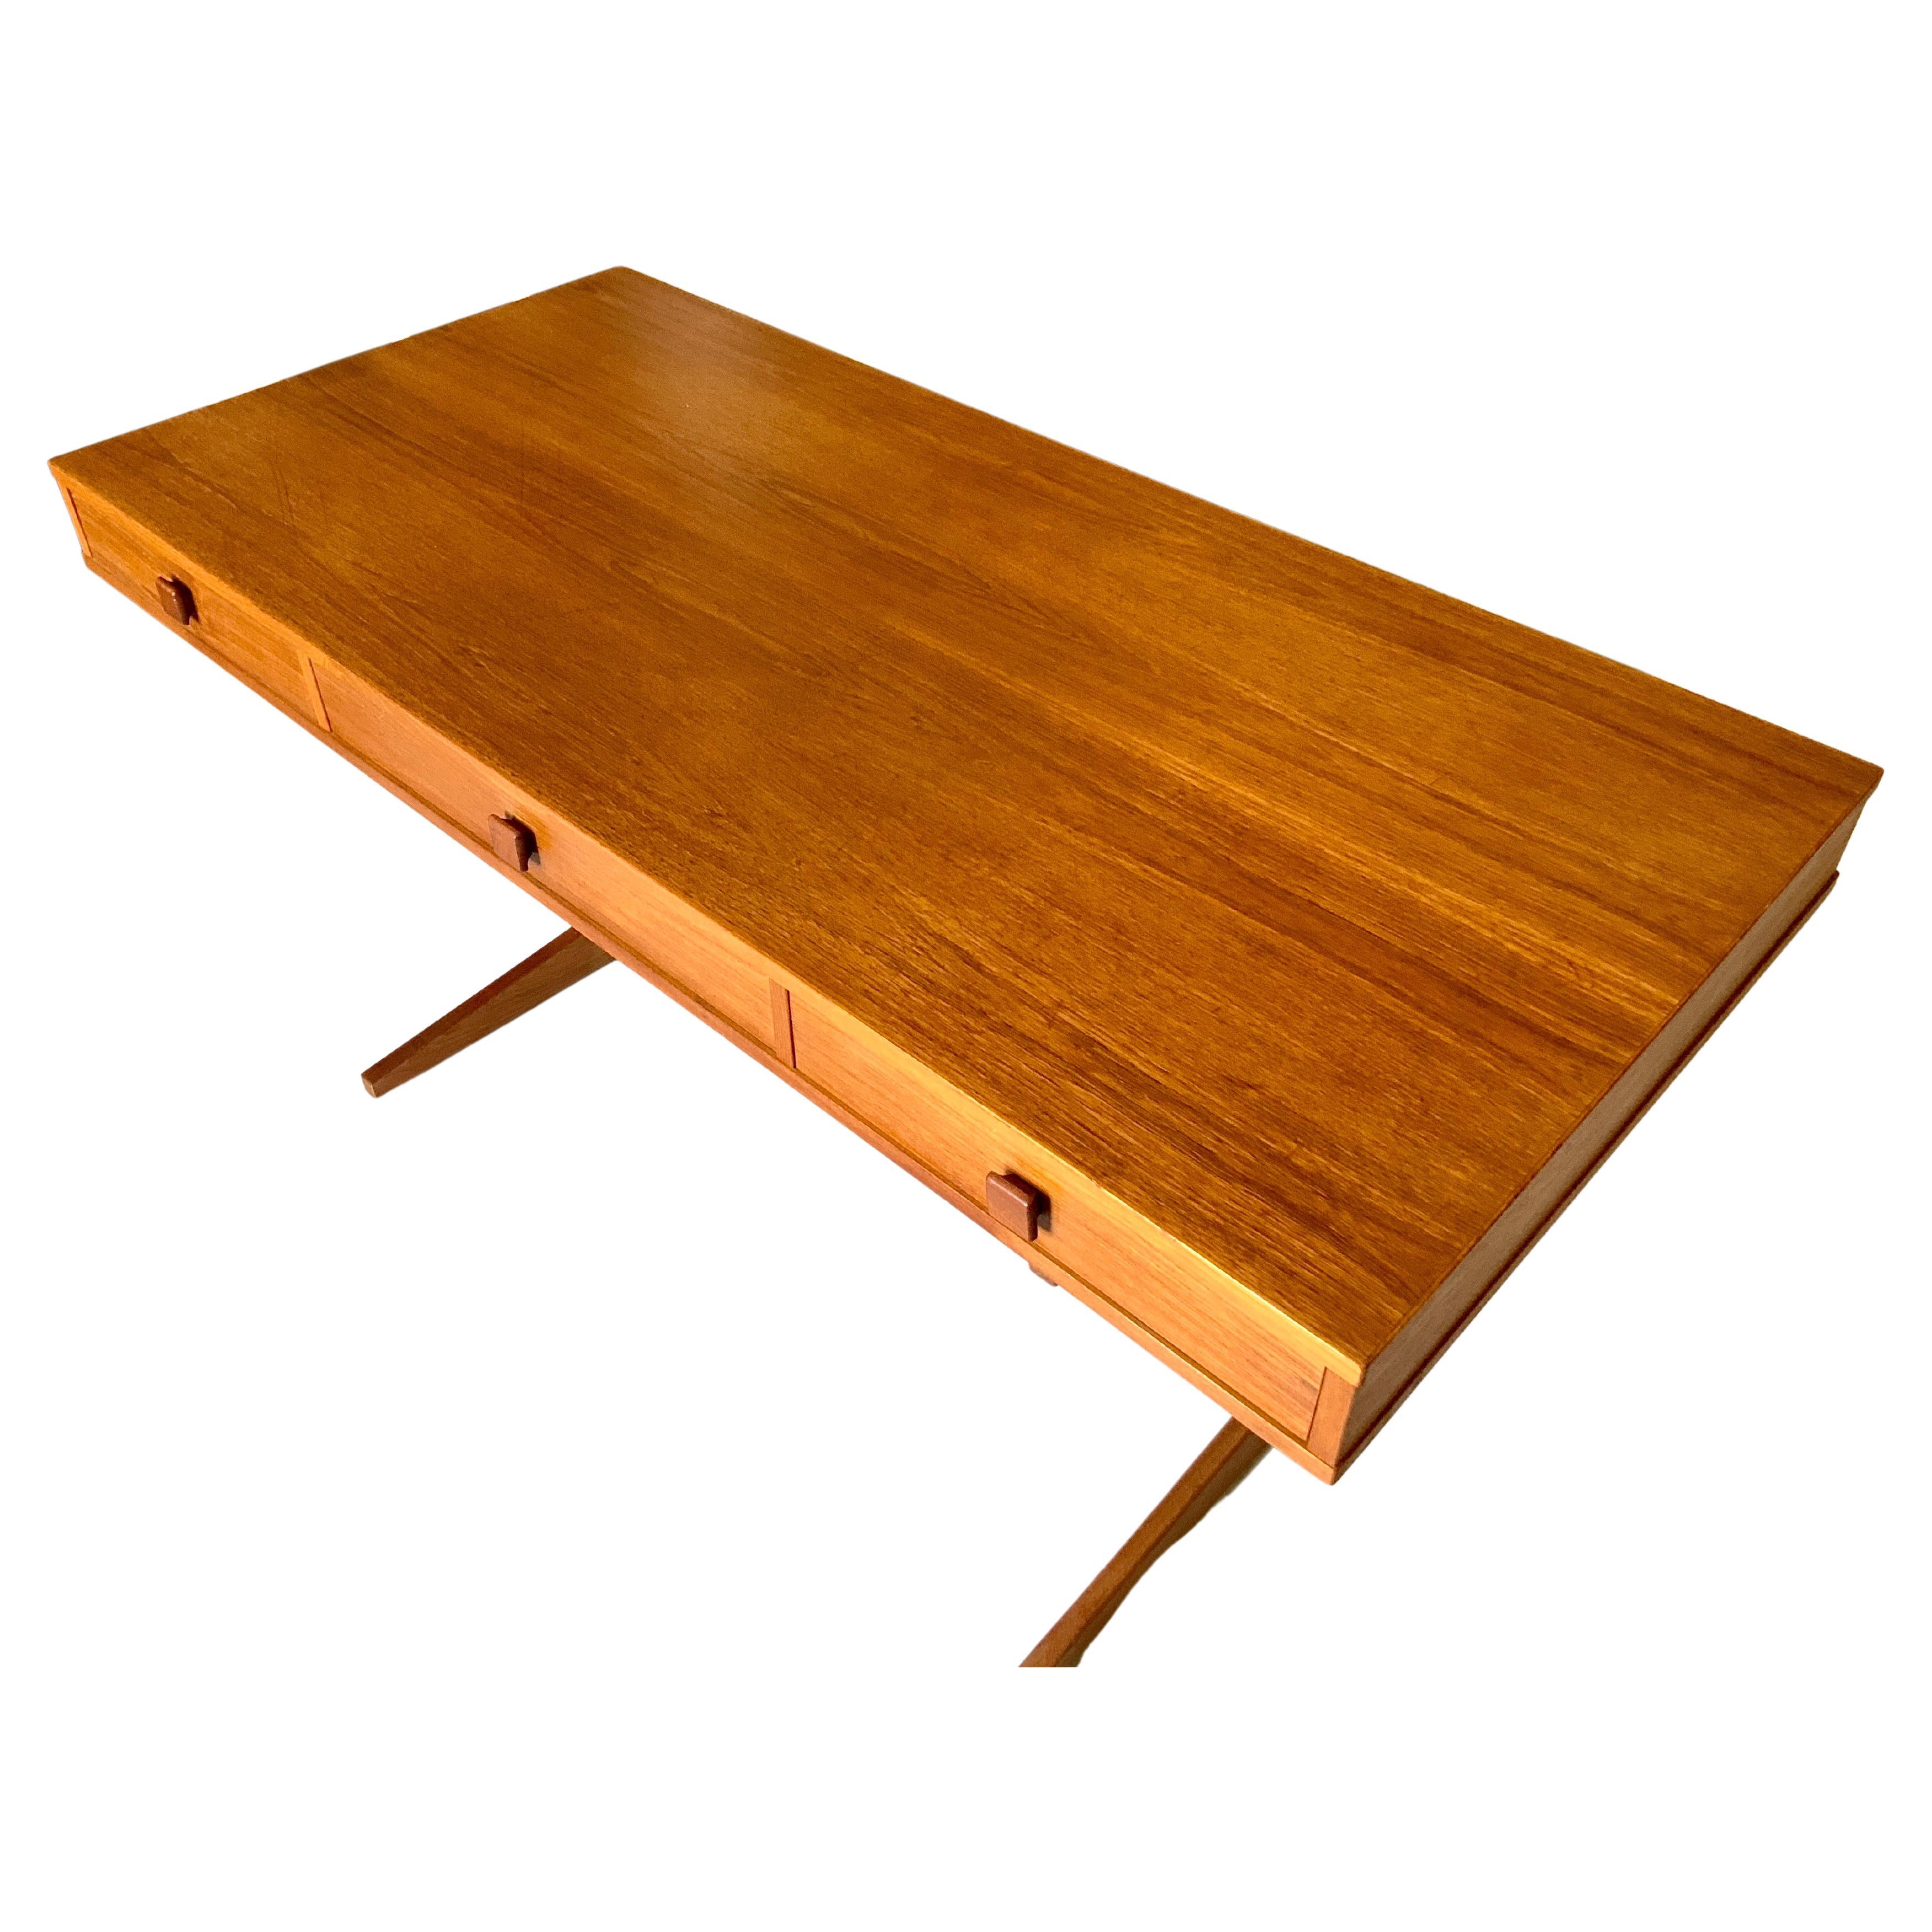 Cantilever desk designed by Georg Petersens for Georg Petersens Mobelfabrik in Denmark. Circa 1960s beautiful teak wood. Unique architectural designed sturdy desk top accompanied by 3 drawers with sculpted square pulls. Desk appears to be floating